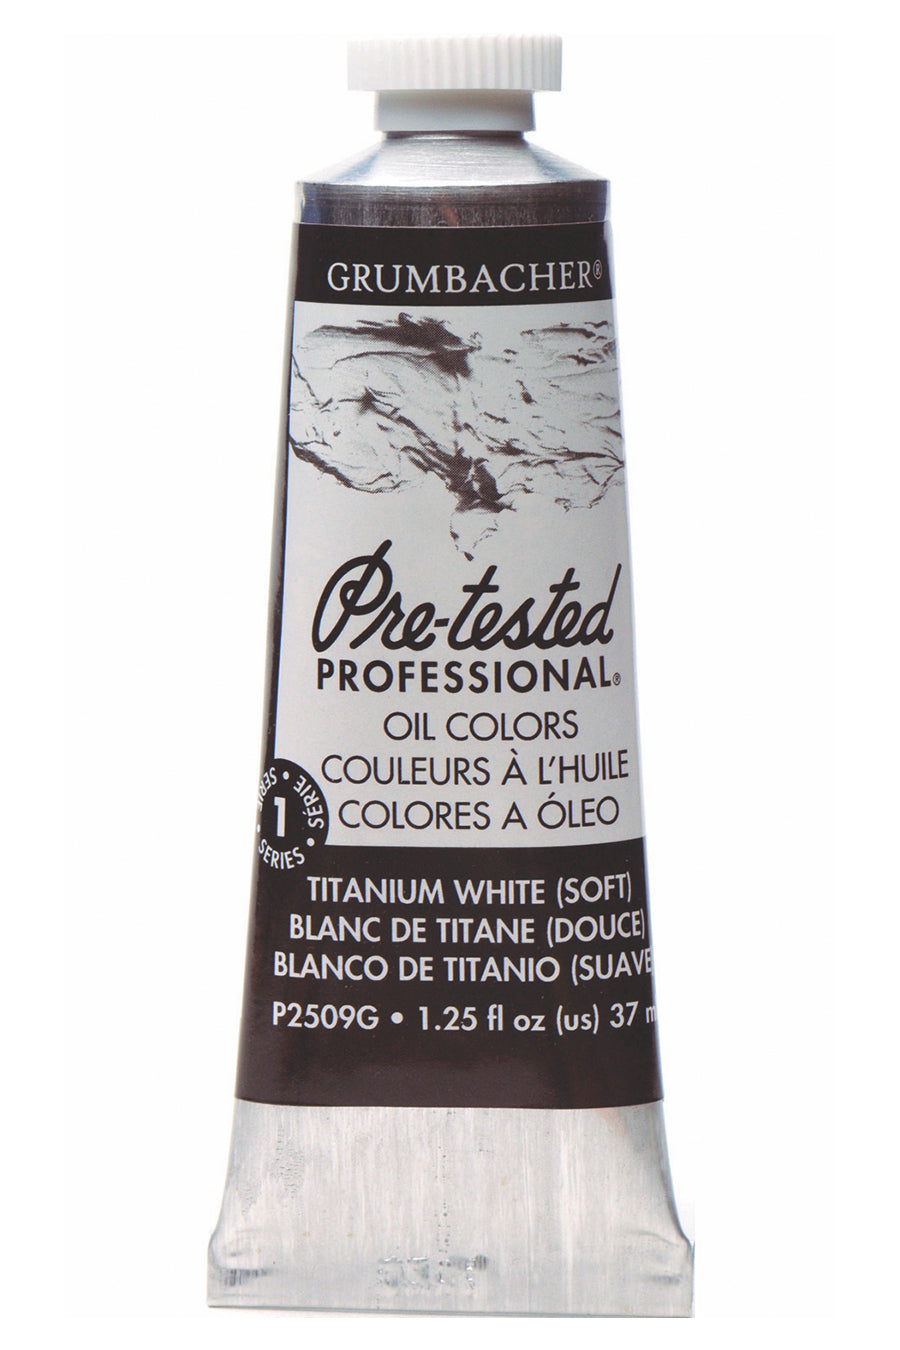 Grumbacher® Pre-tested® Oil White Color Family